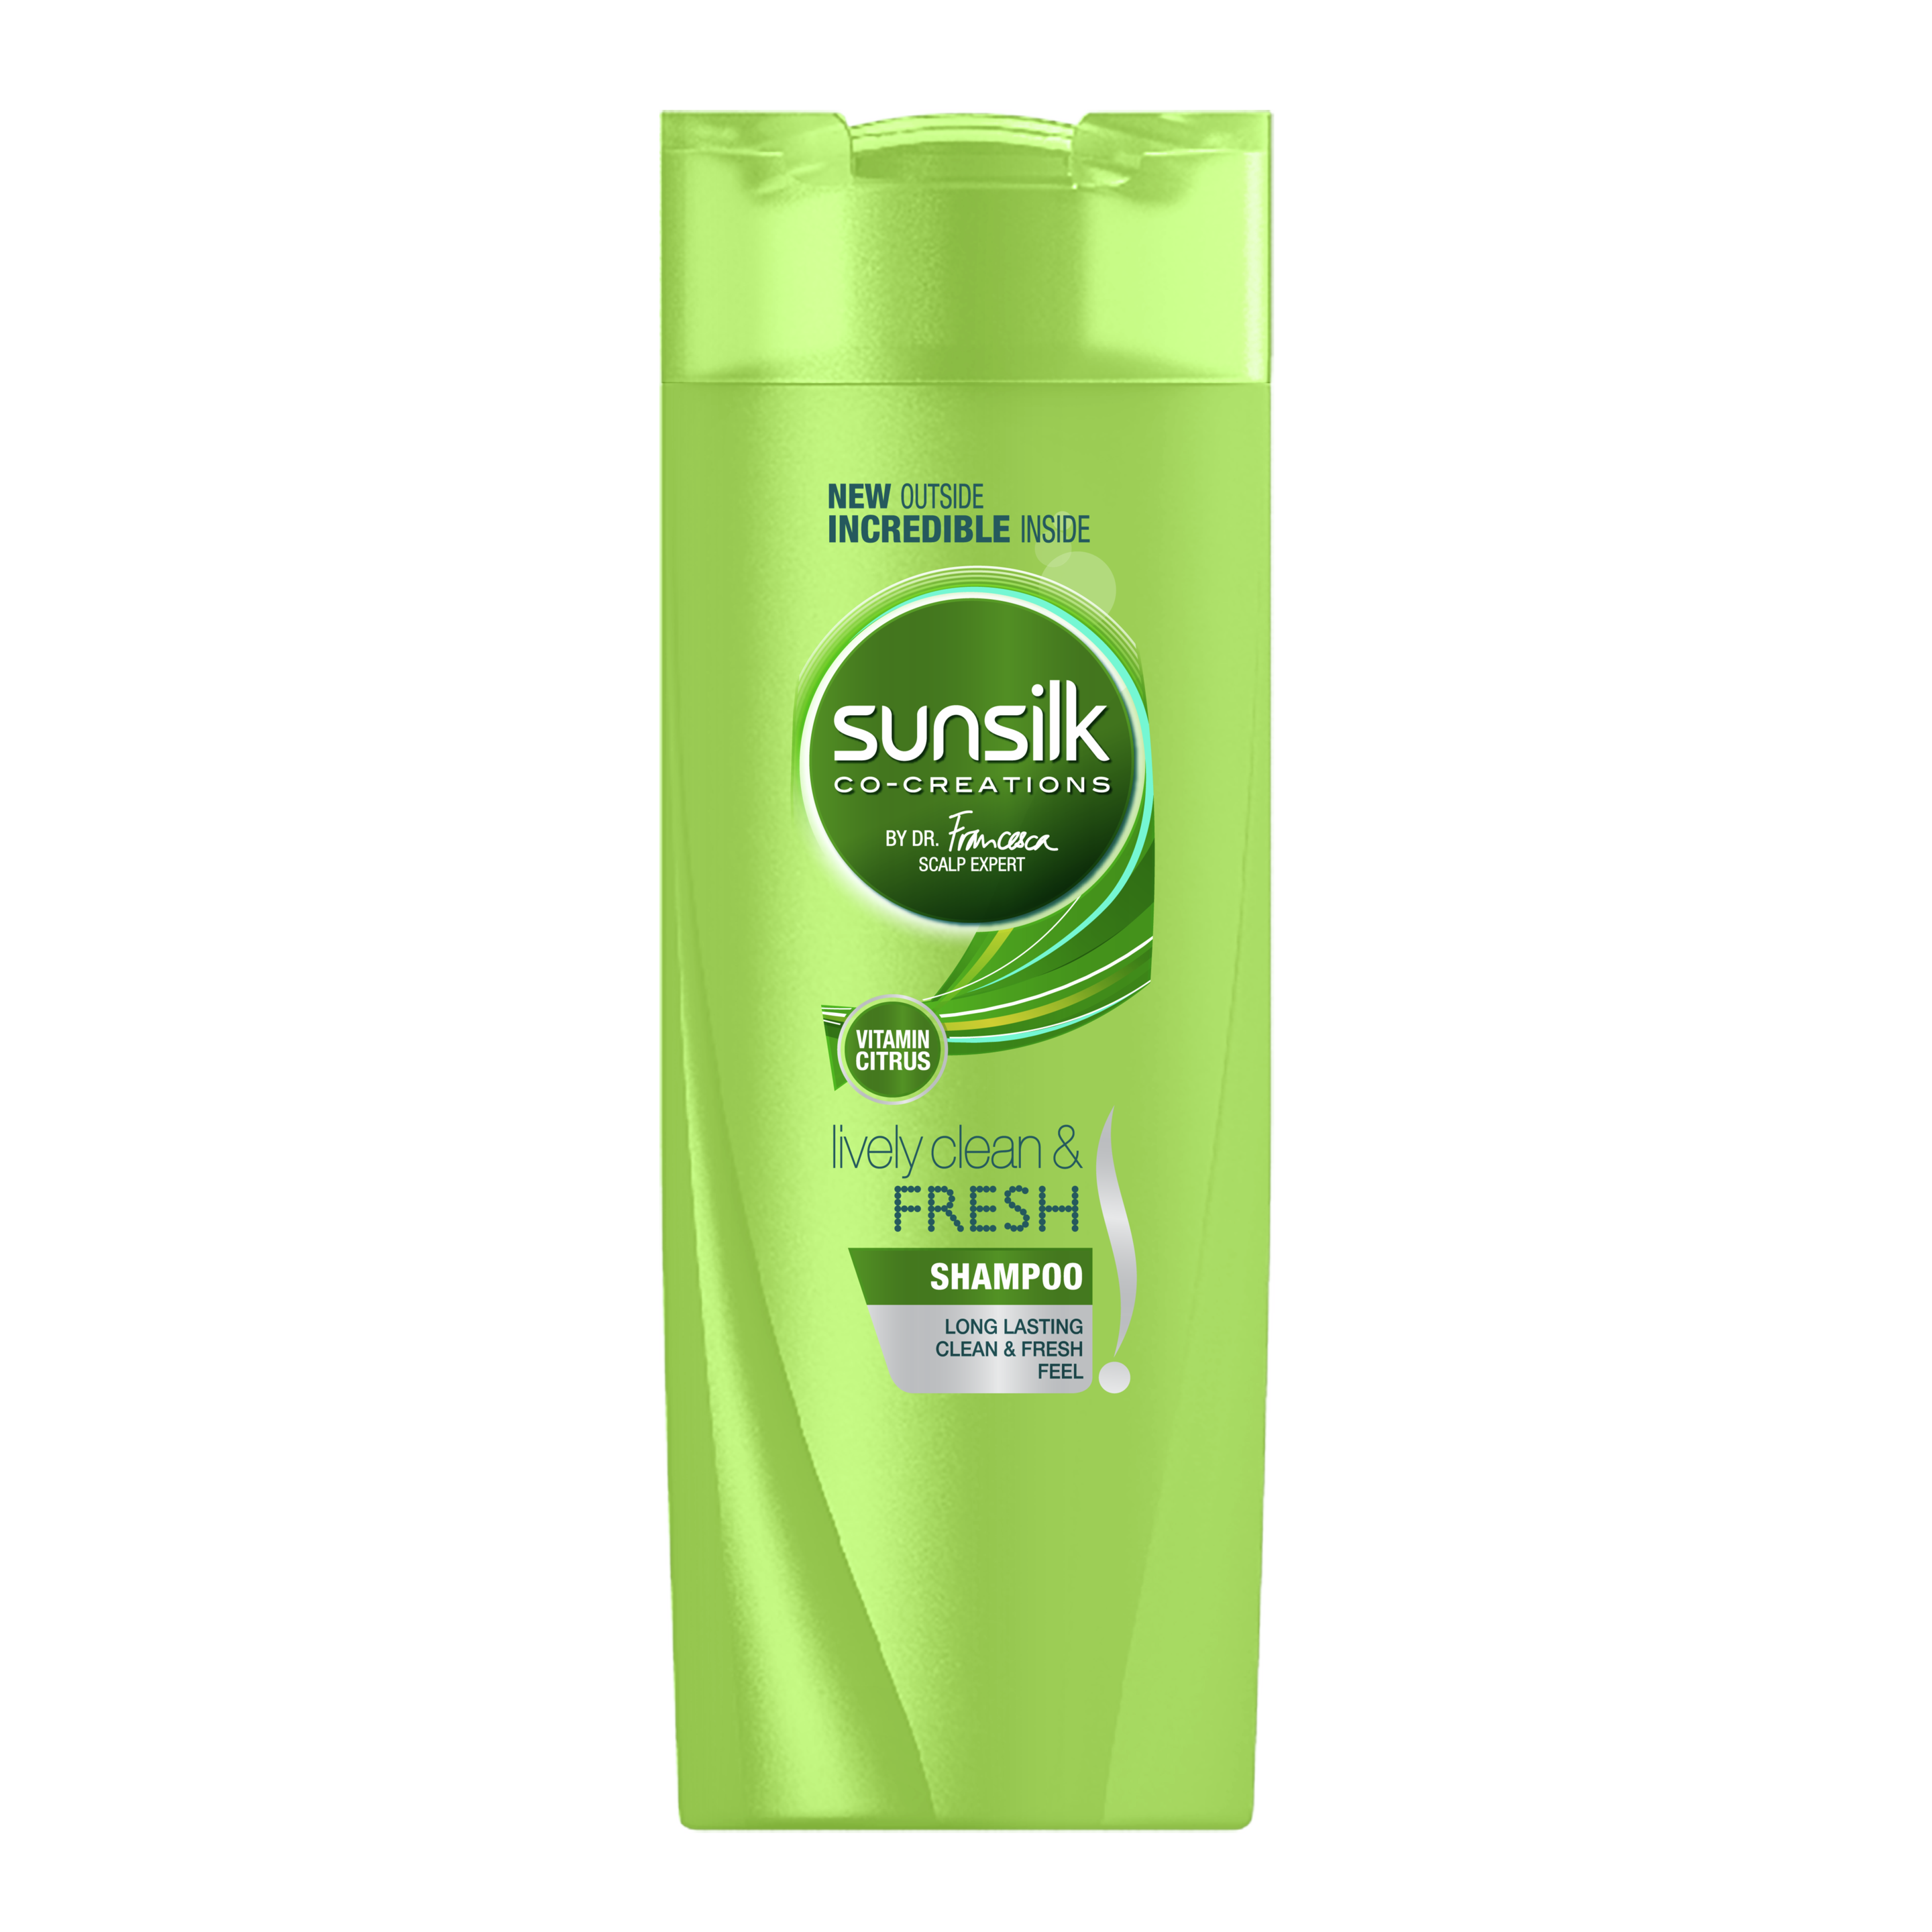 Sunsilk Lively Clean and Fresh Shampoo 70ml front of pack image